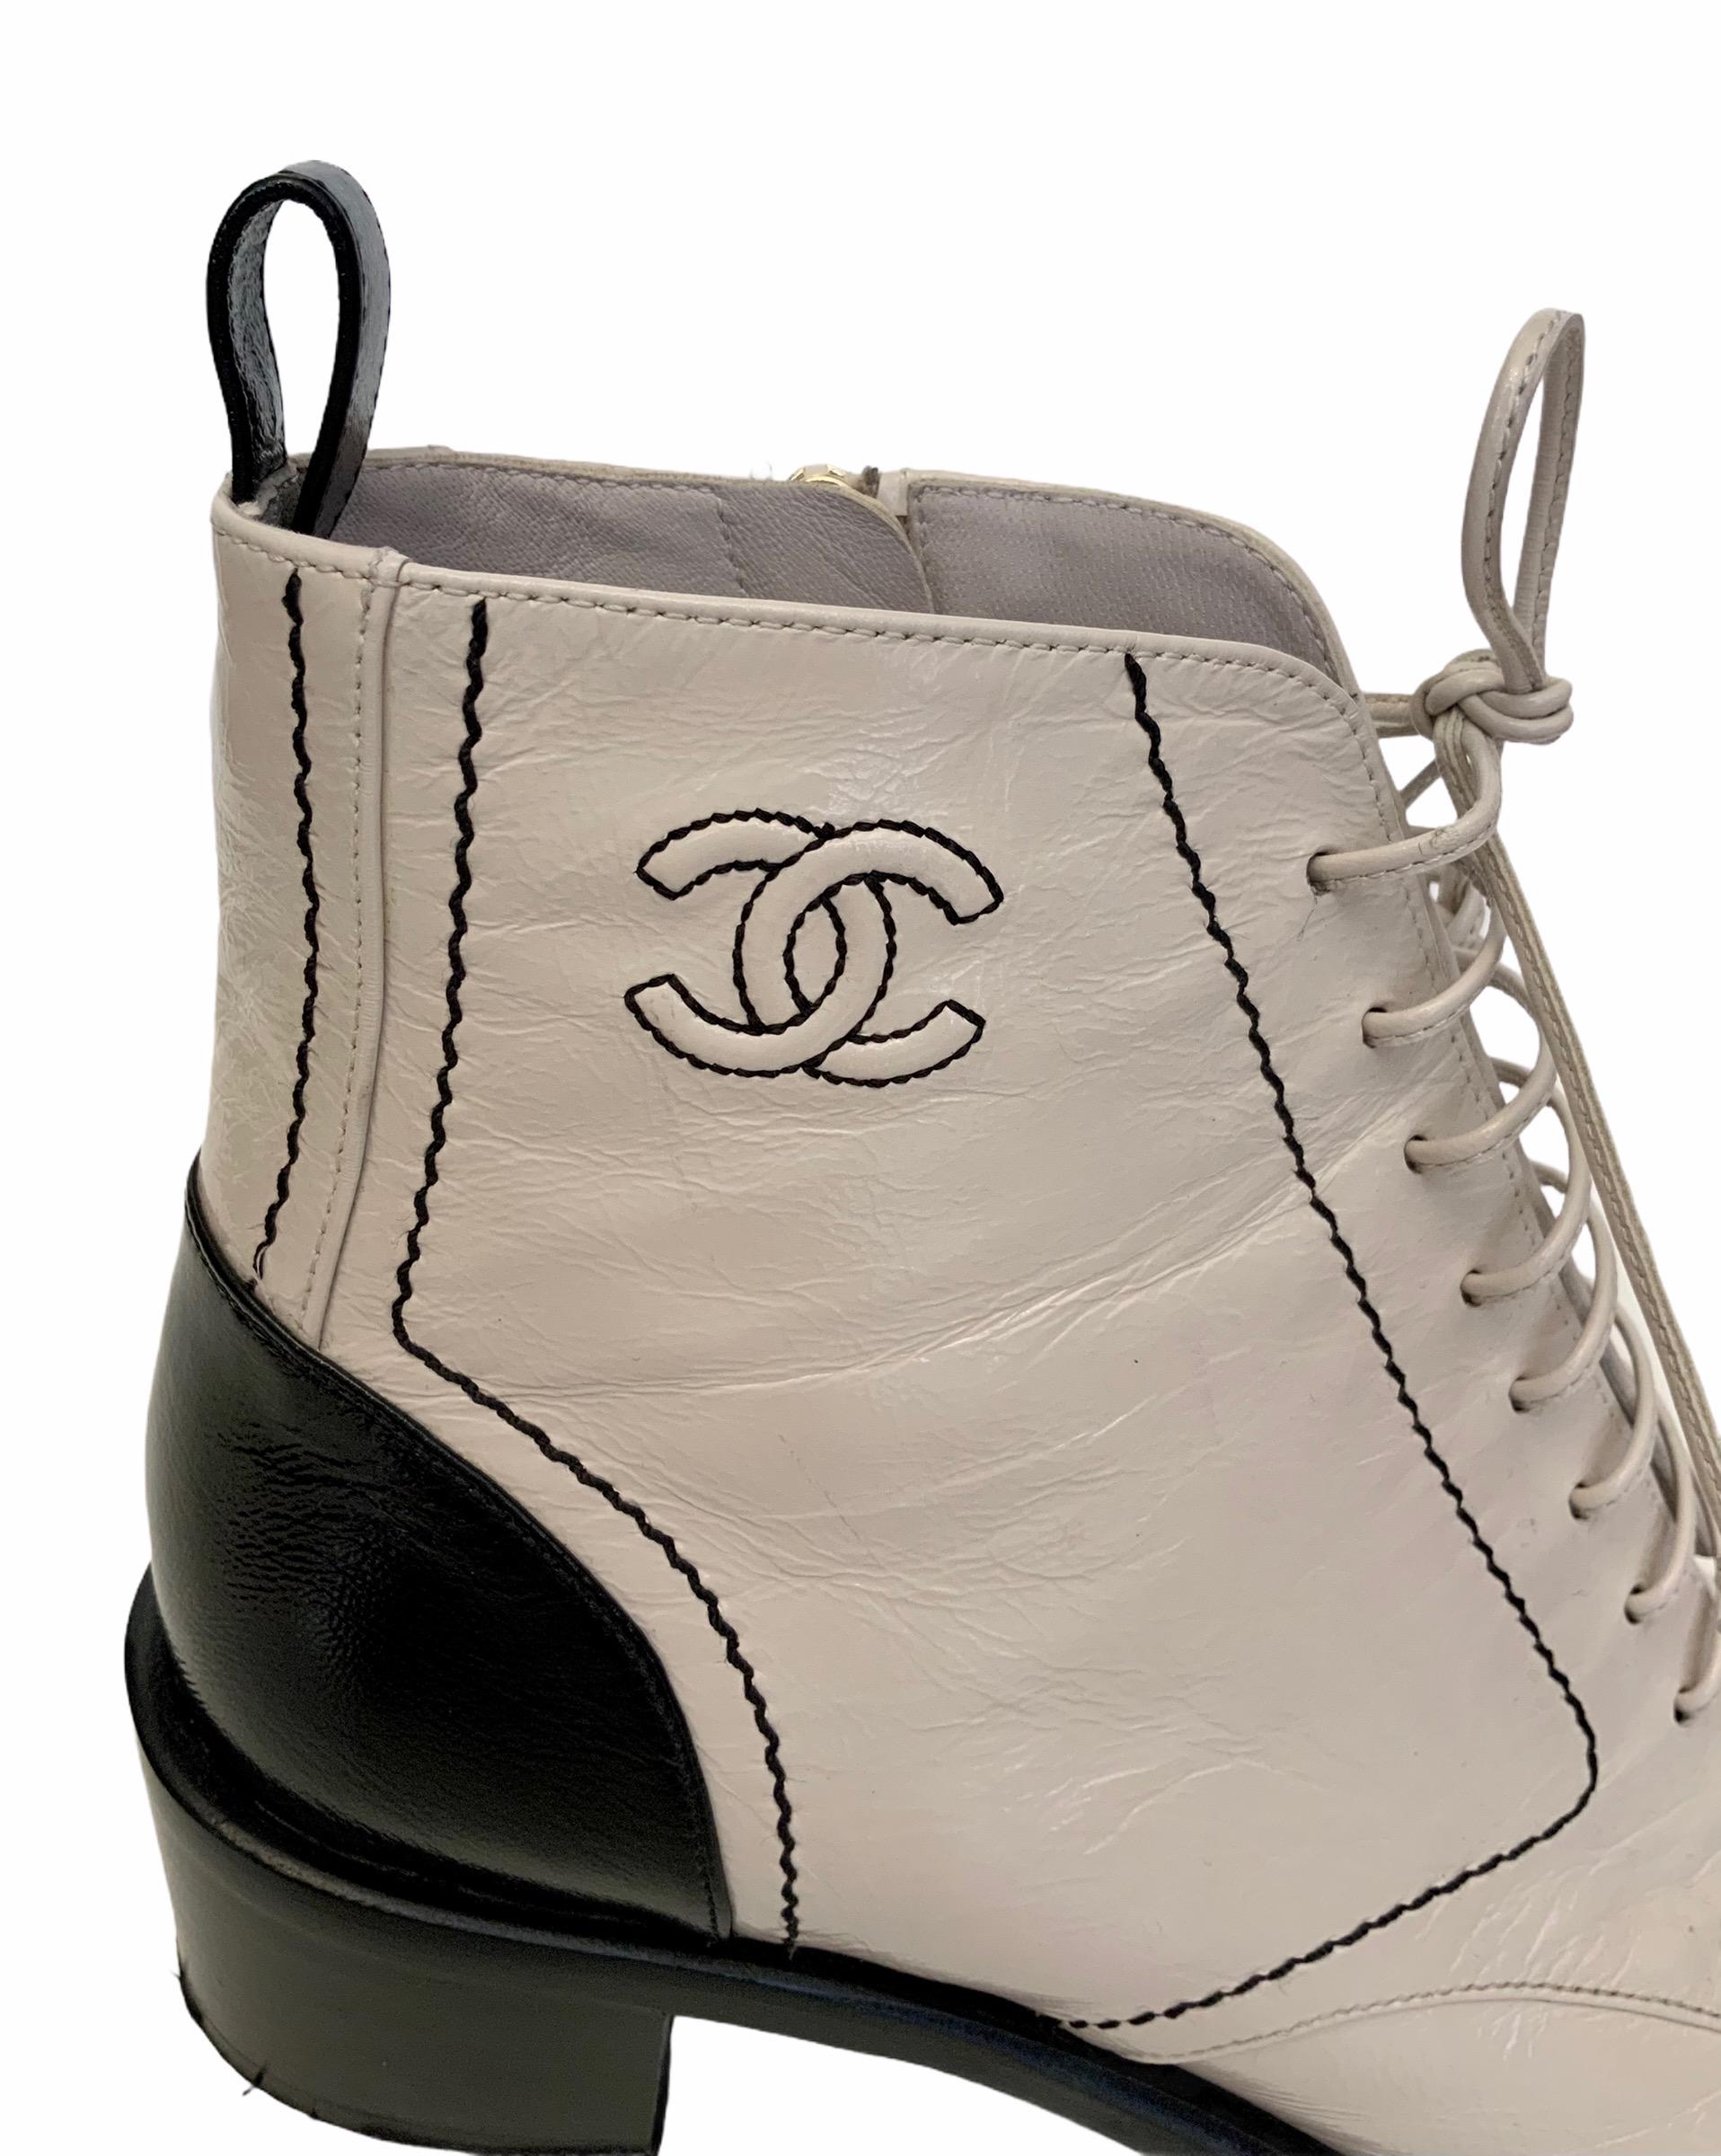 True to the two-tone style of Chanel , these lace-up boots are crafted in a beautiful beige patent calfskin leather. 
They feature black round toe and contrasting stitches details.

Collection: Cruise 2019
Material: calfskin
Insole and outsole: